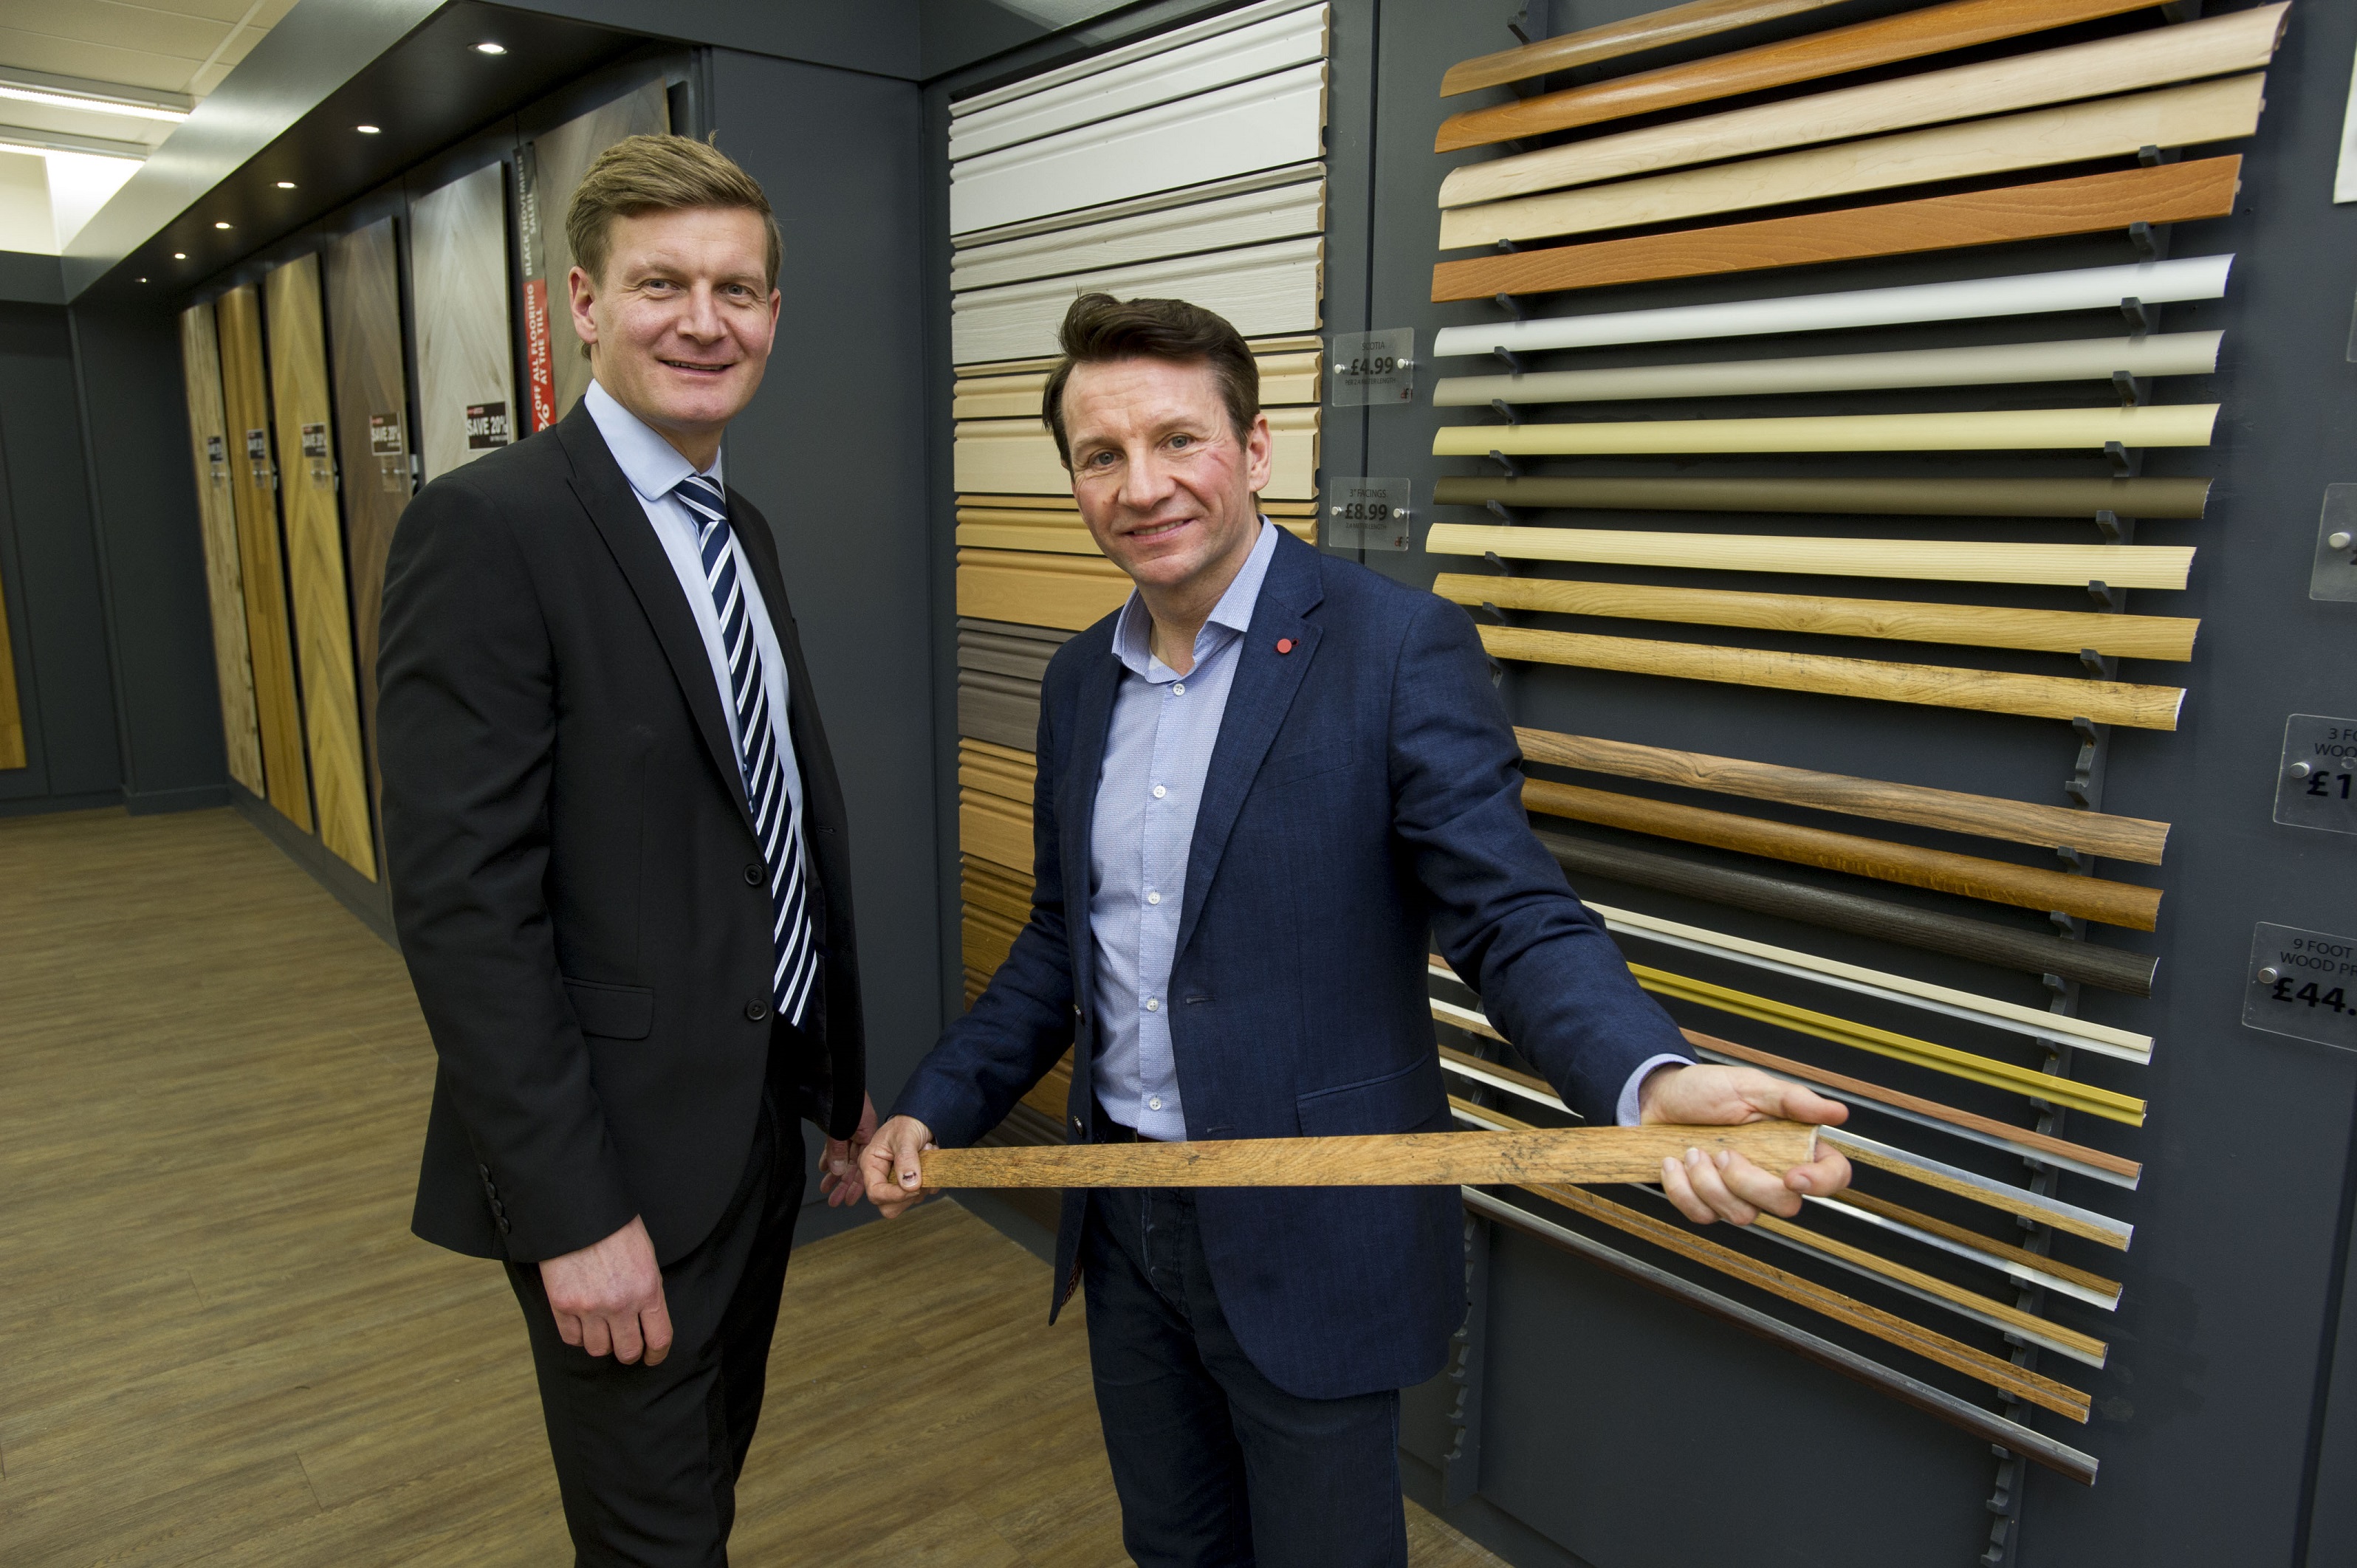 Direct Flooring receives £1.5m funding package from Bank of Scotland